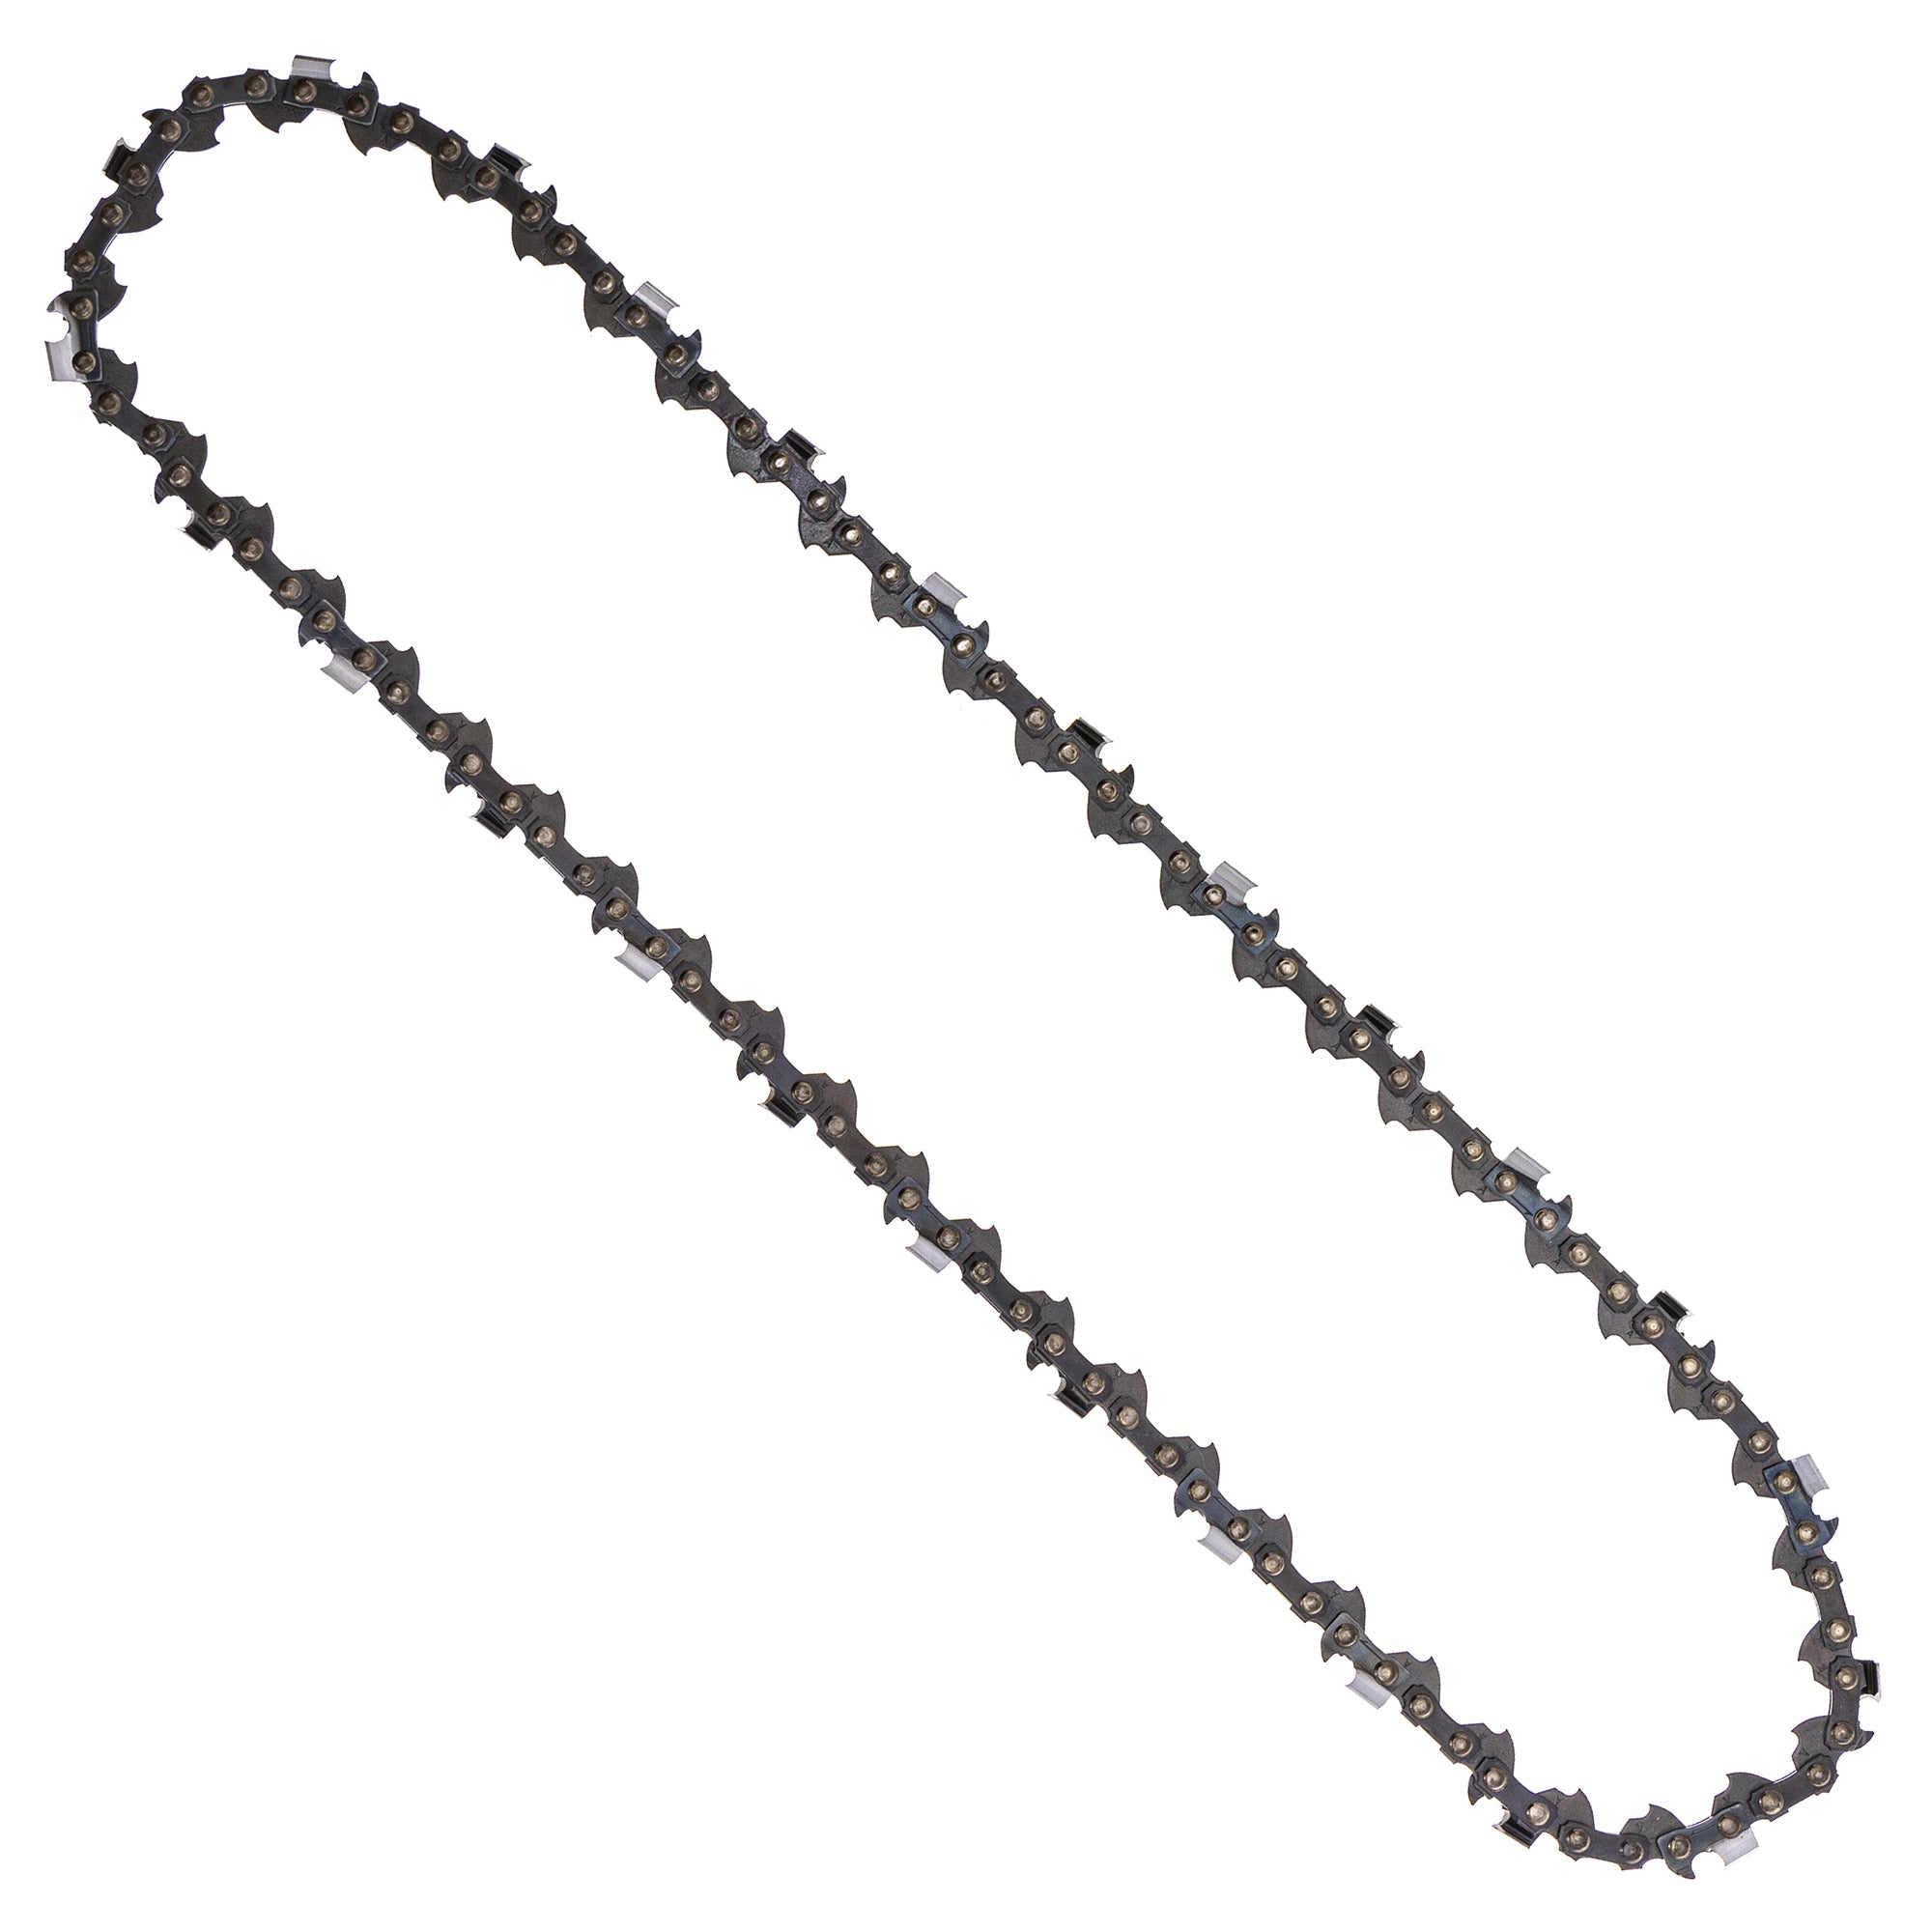 8TEN 810-CCC2234H Chain 5-Pack for zOTHER Stens Oregon Husqvarna